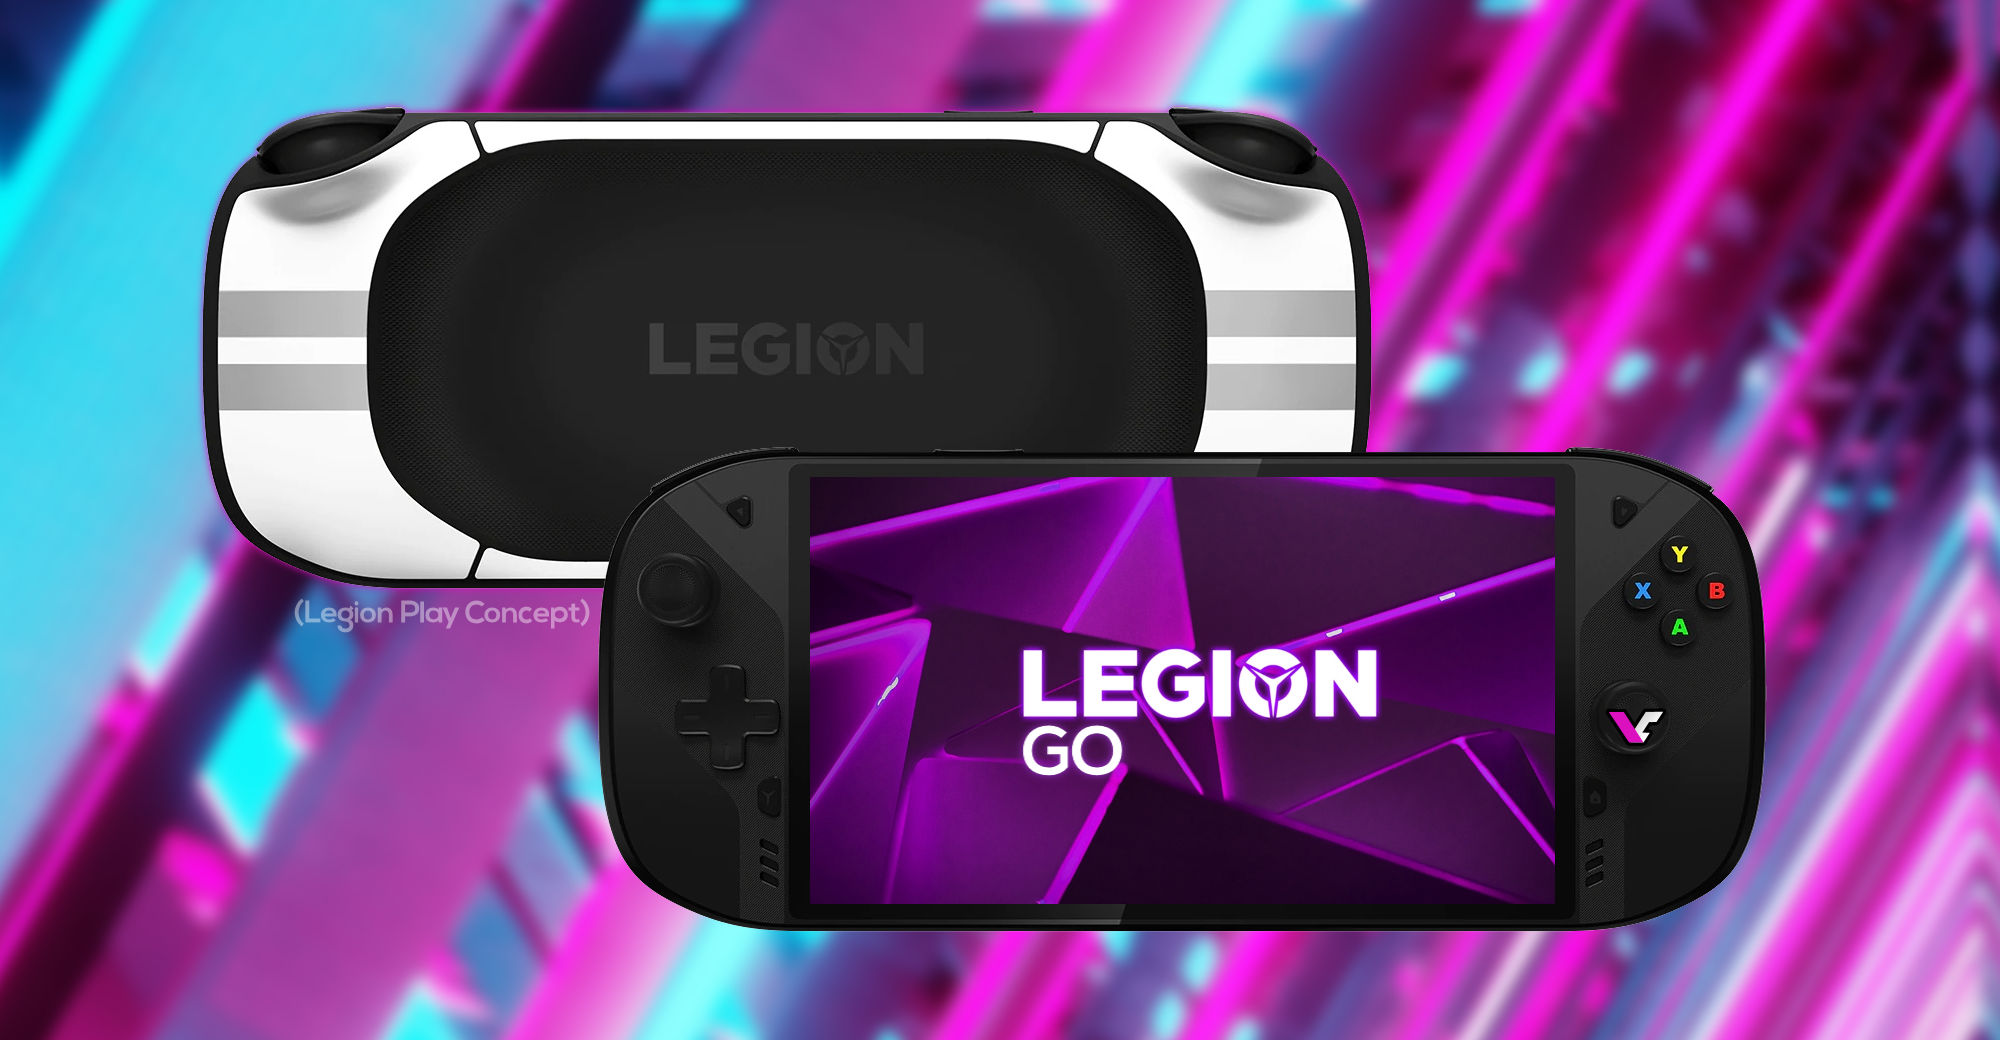 Lenovo's upcoming LEGION GO gaming handheld reportedly features